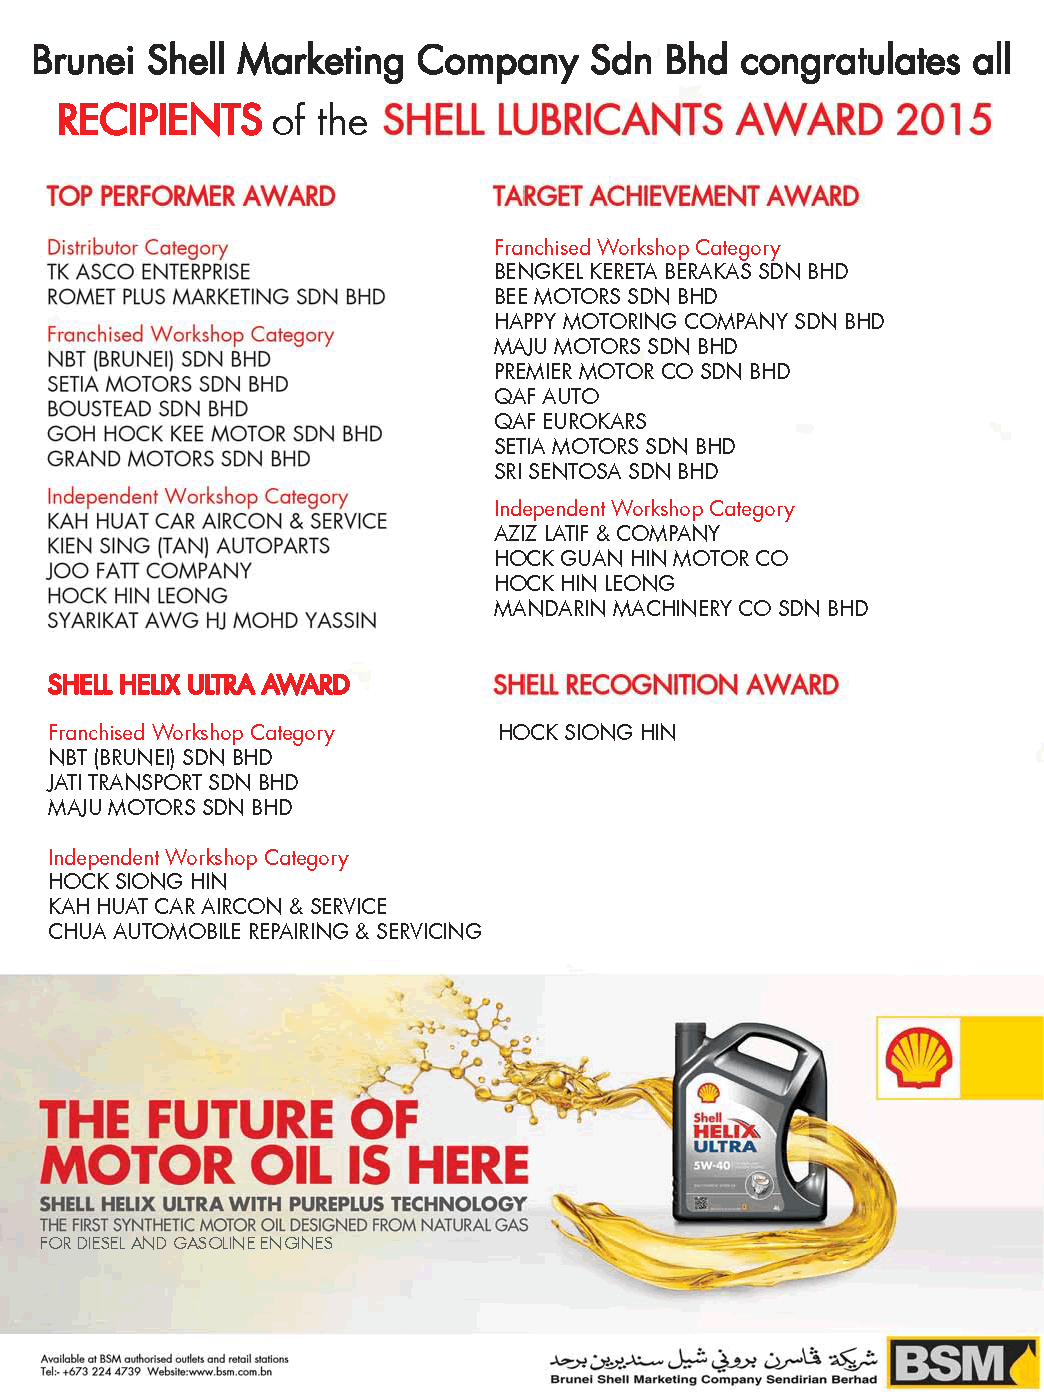 shell lubricants awards 2015